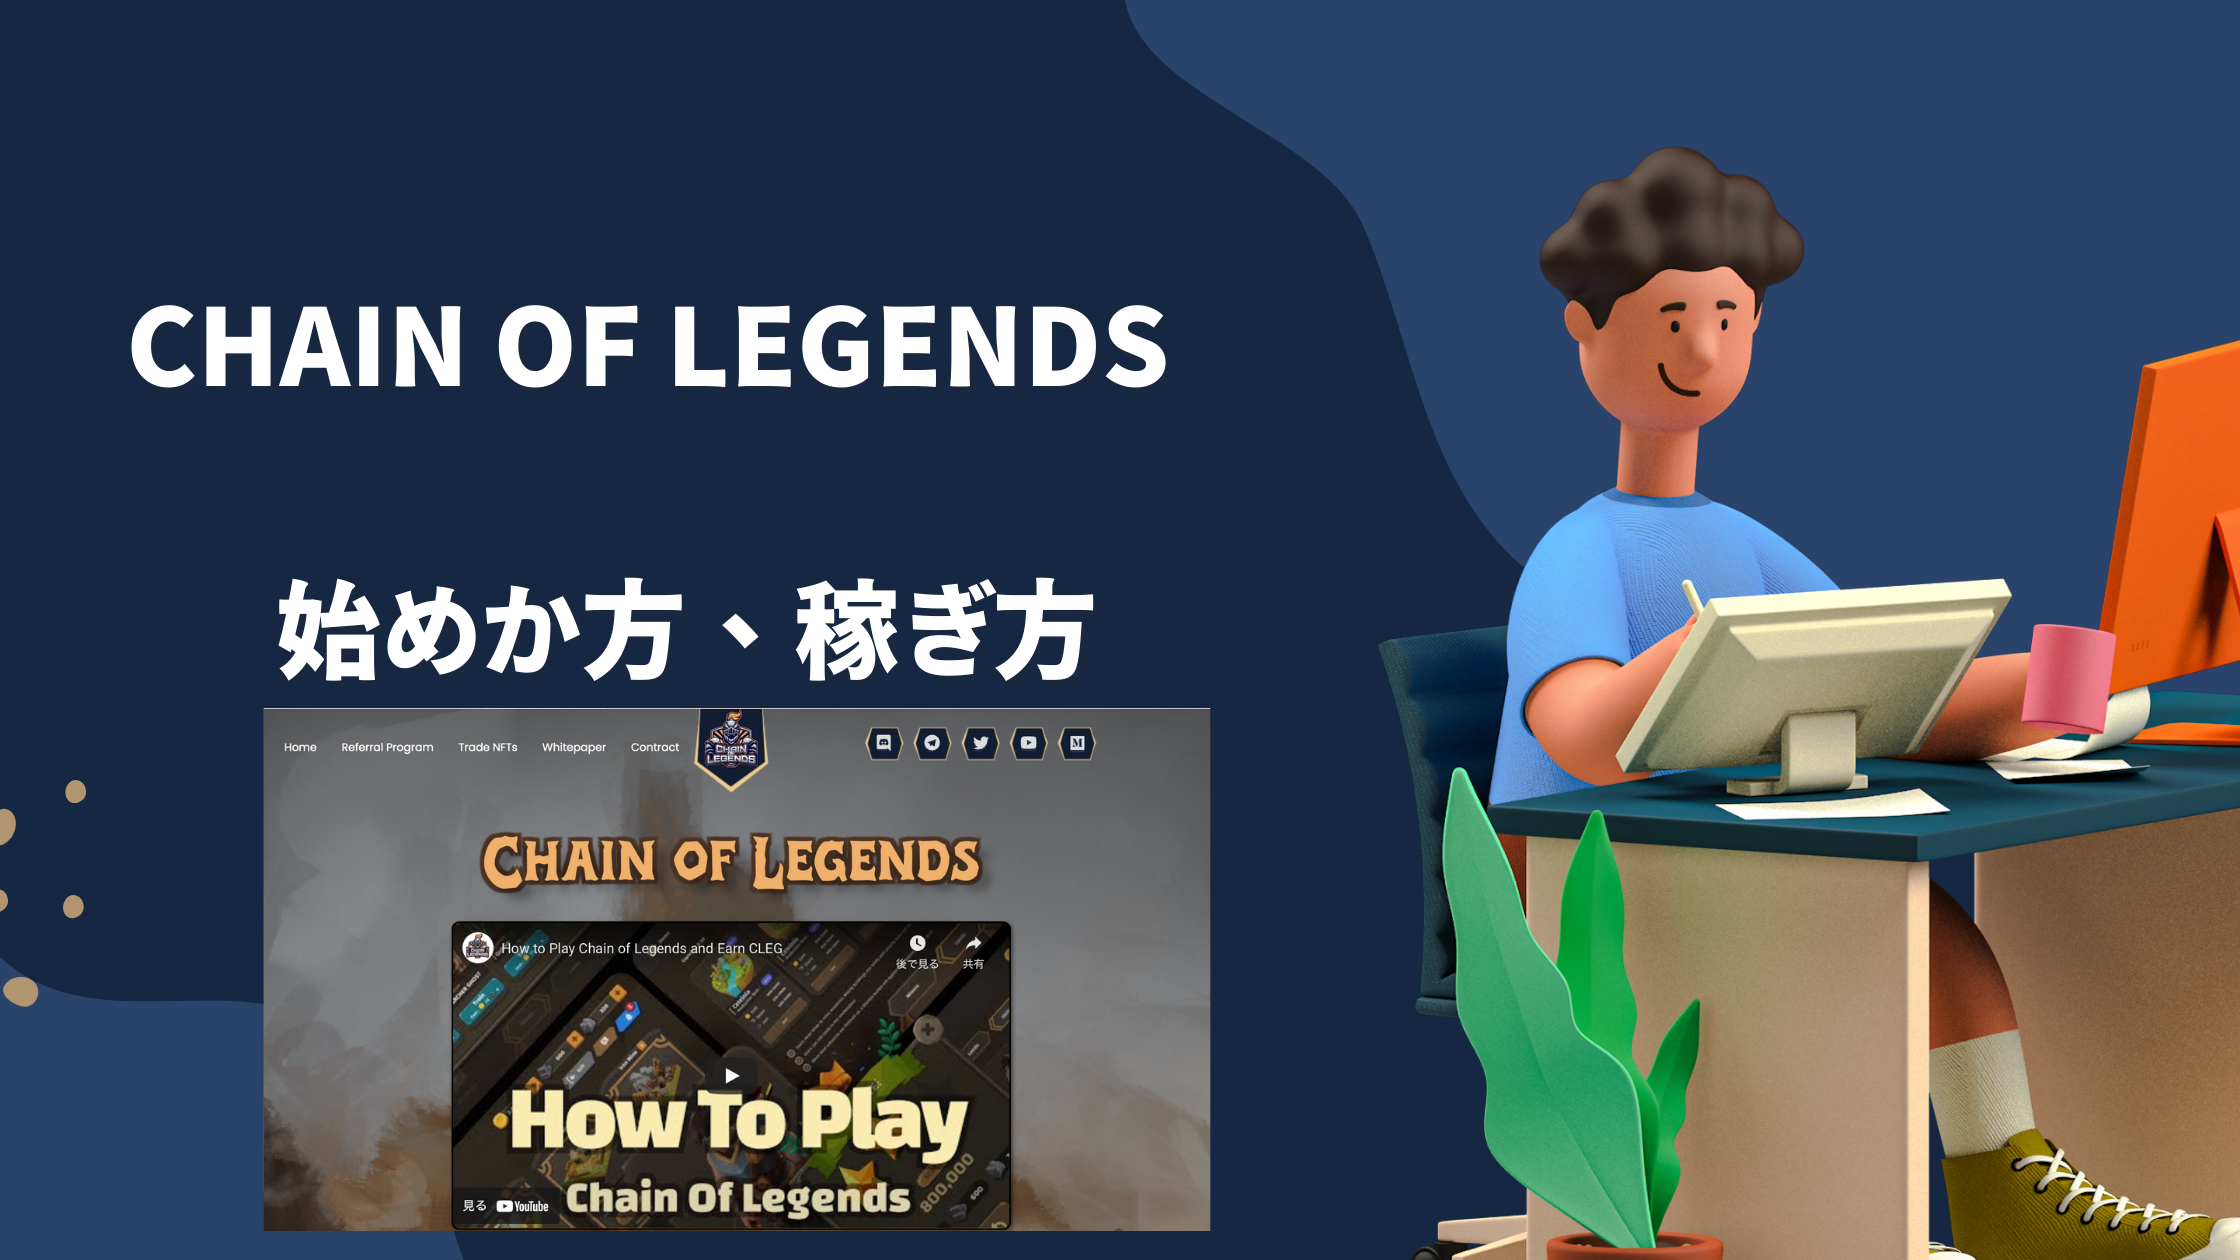 CHAIN OF LEGENDS